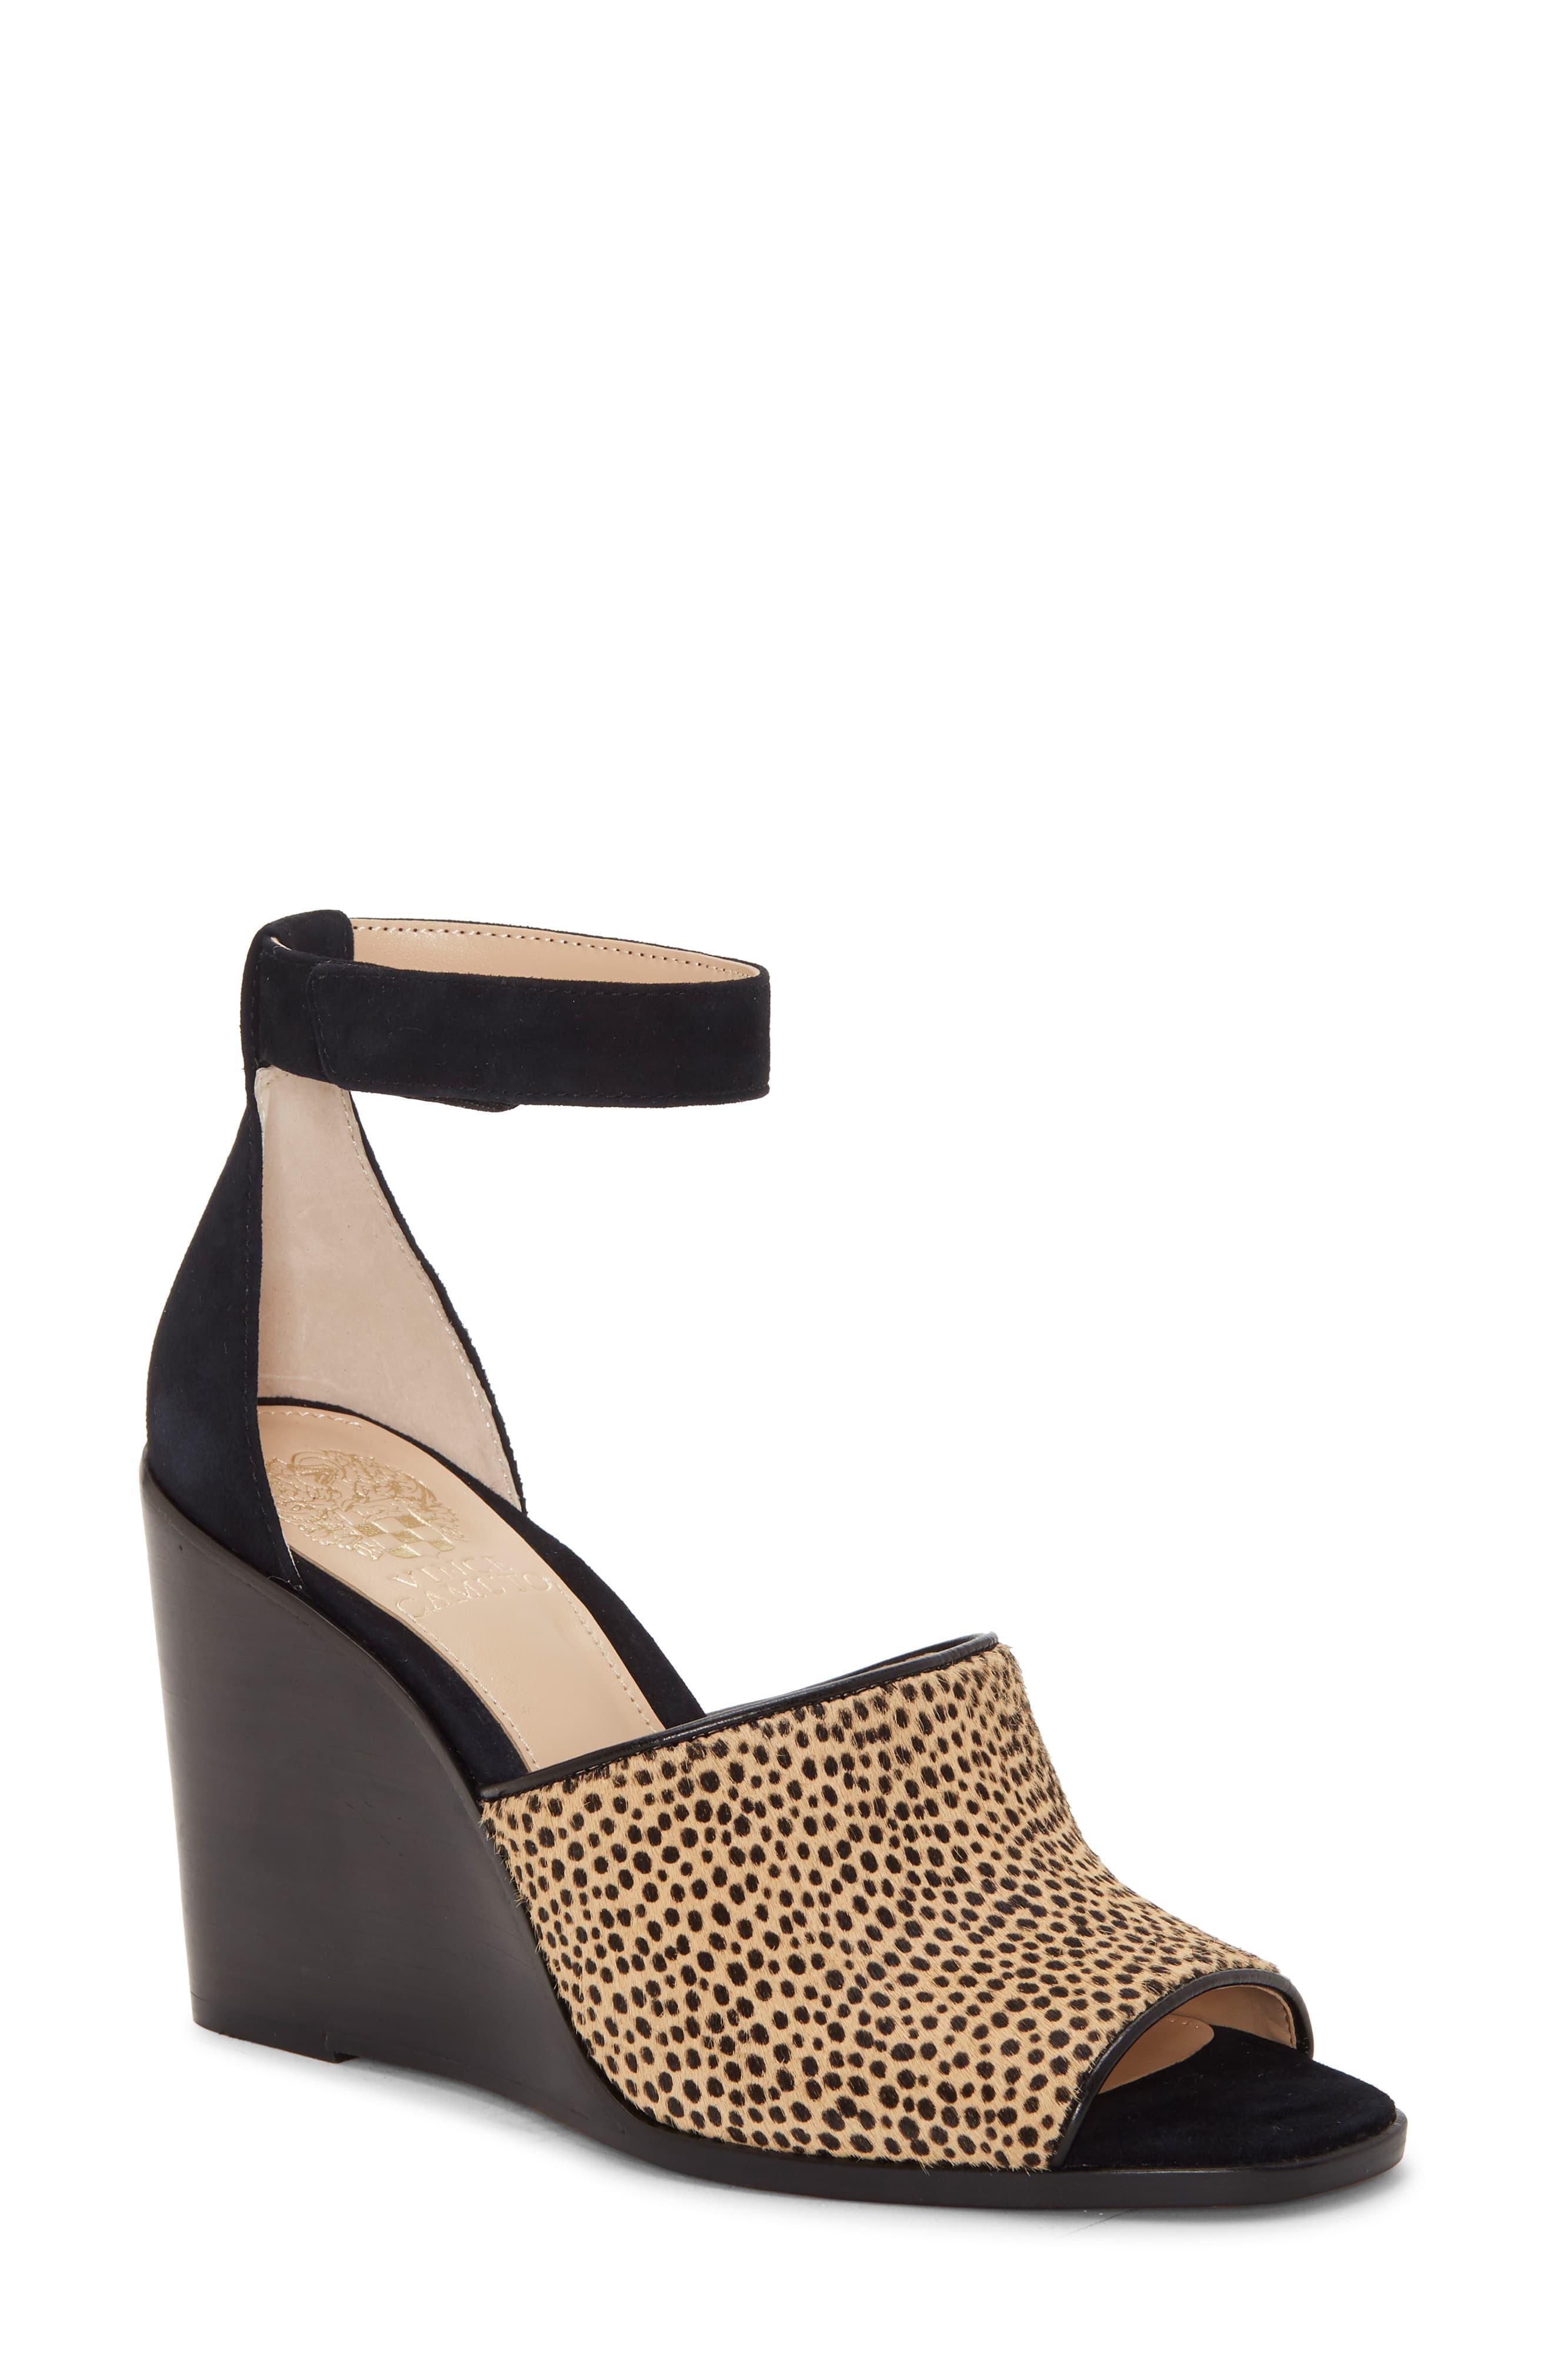 vince camuto leopard wedges